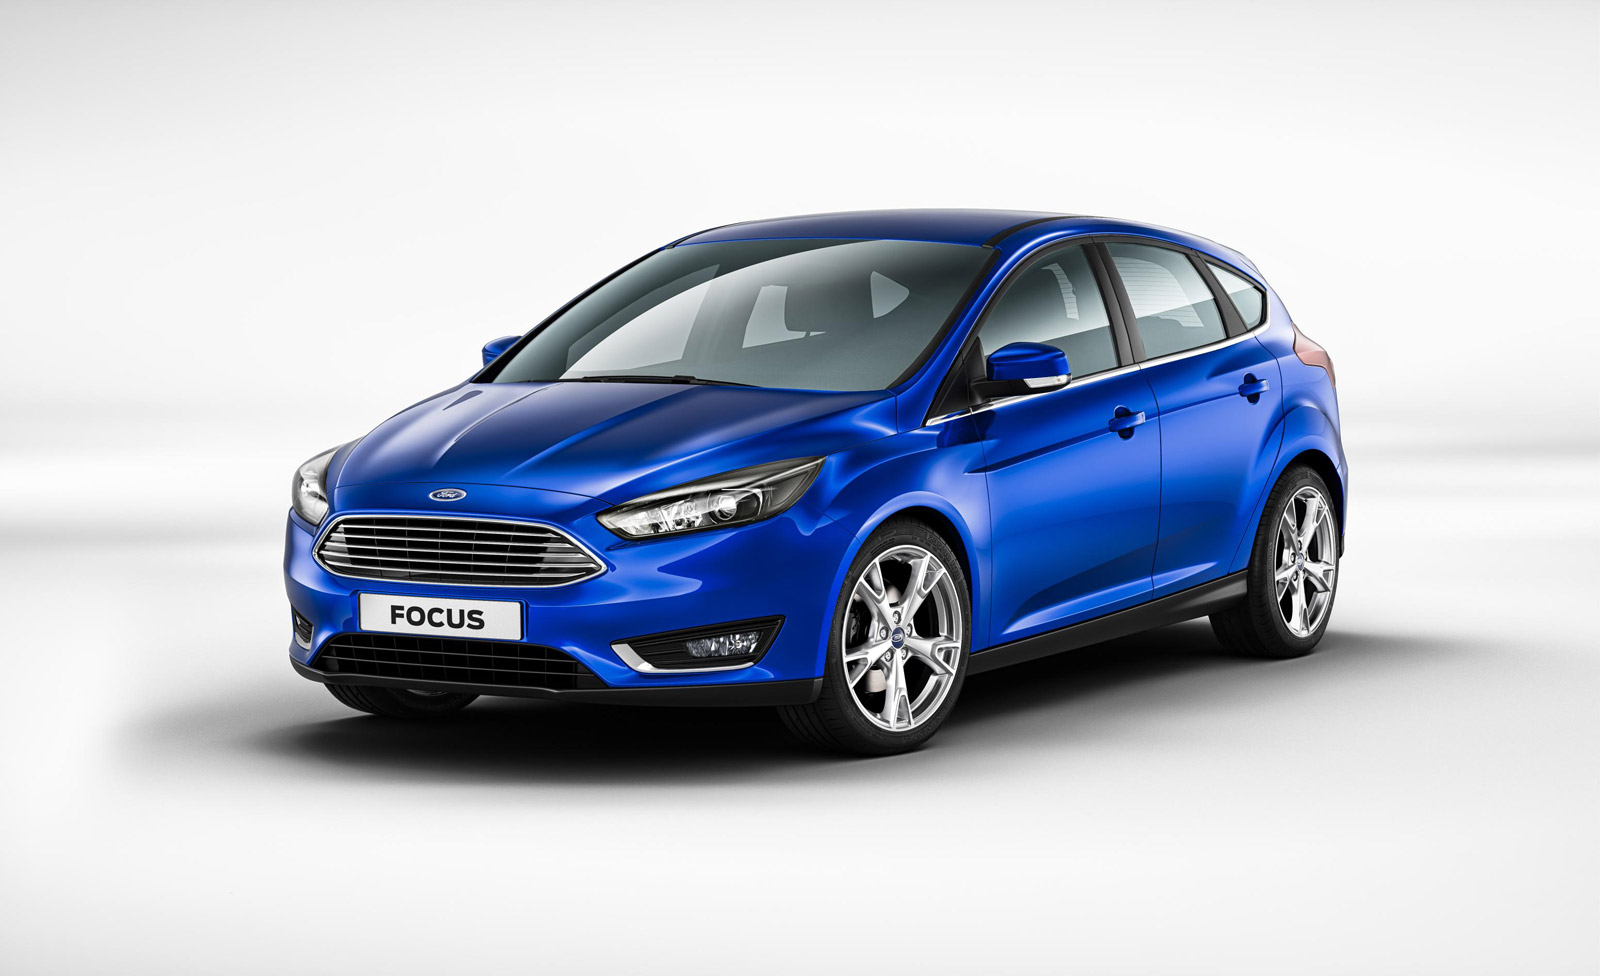 2015 Ford Focus Gets New Look, 1.0-Liter EcoBoost And Driver-Assist Tech